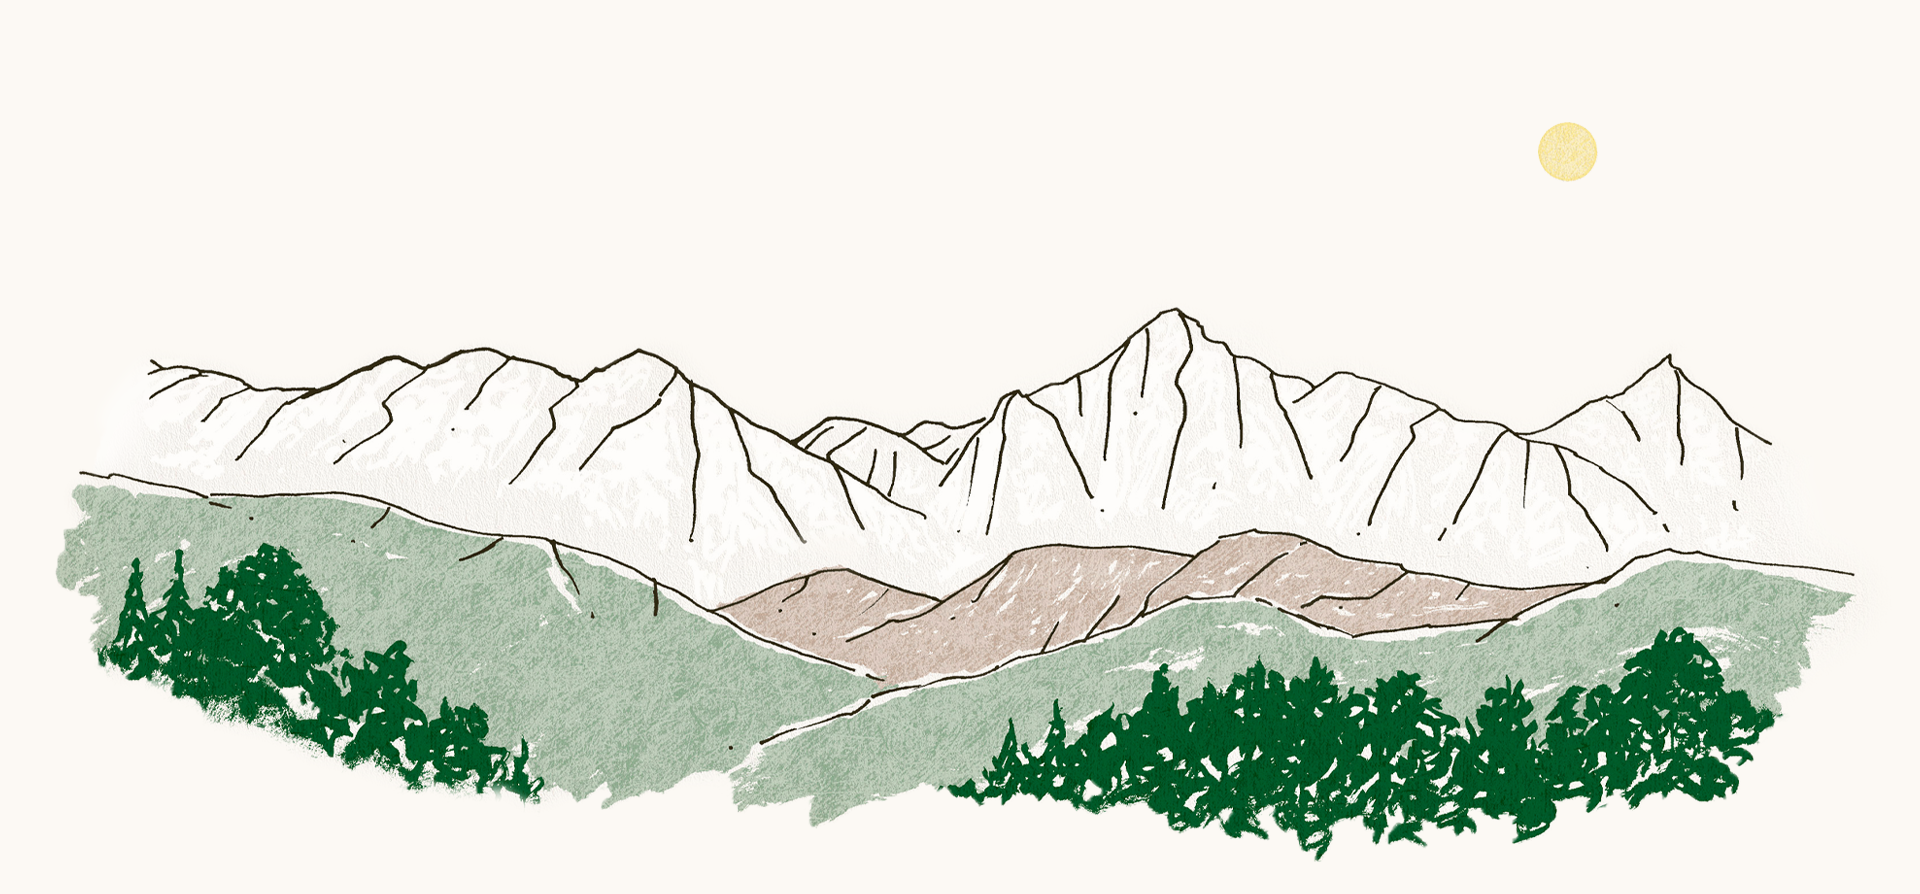 Illustration of some mountains